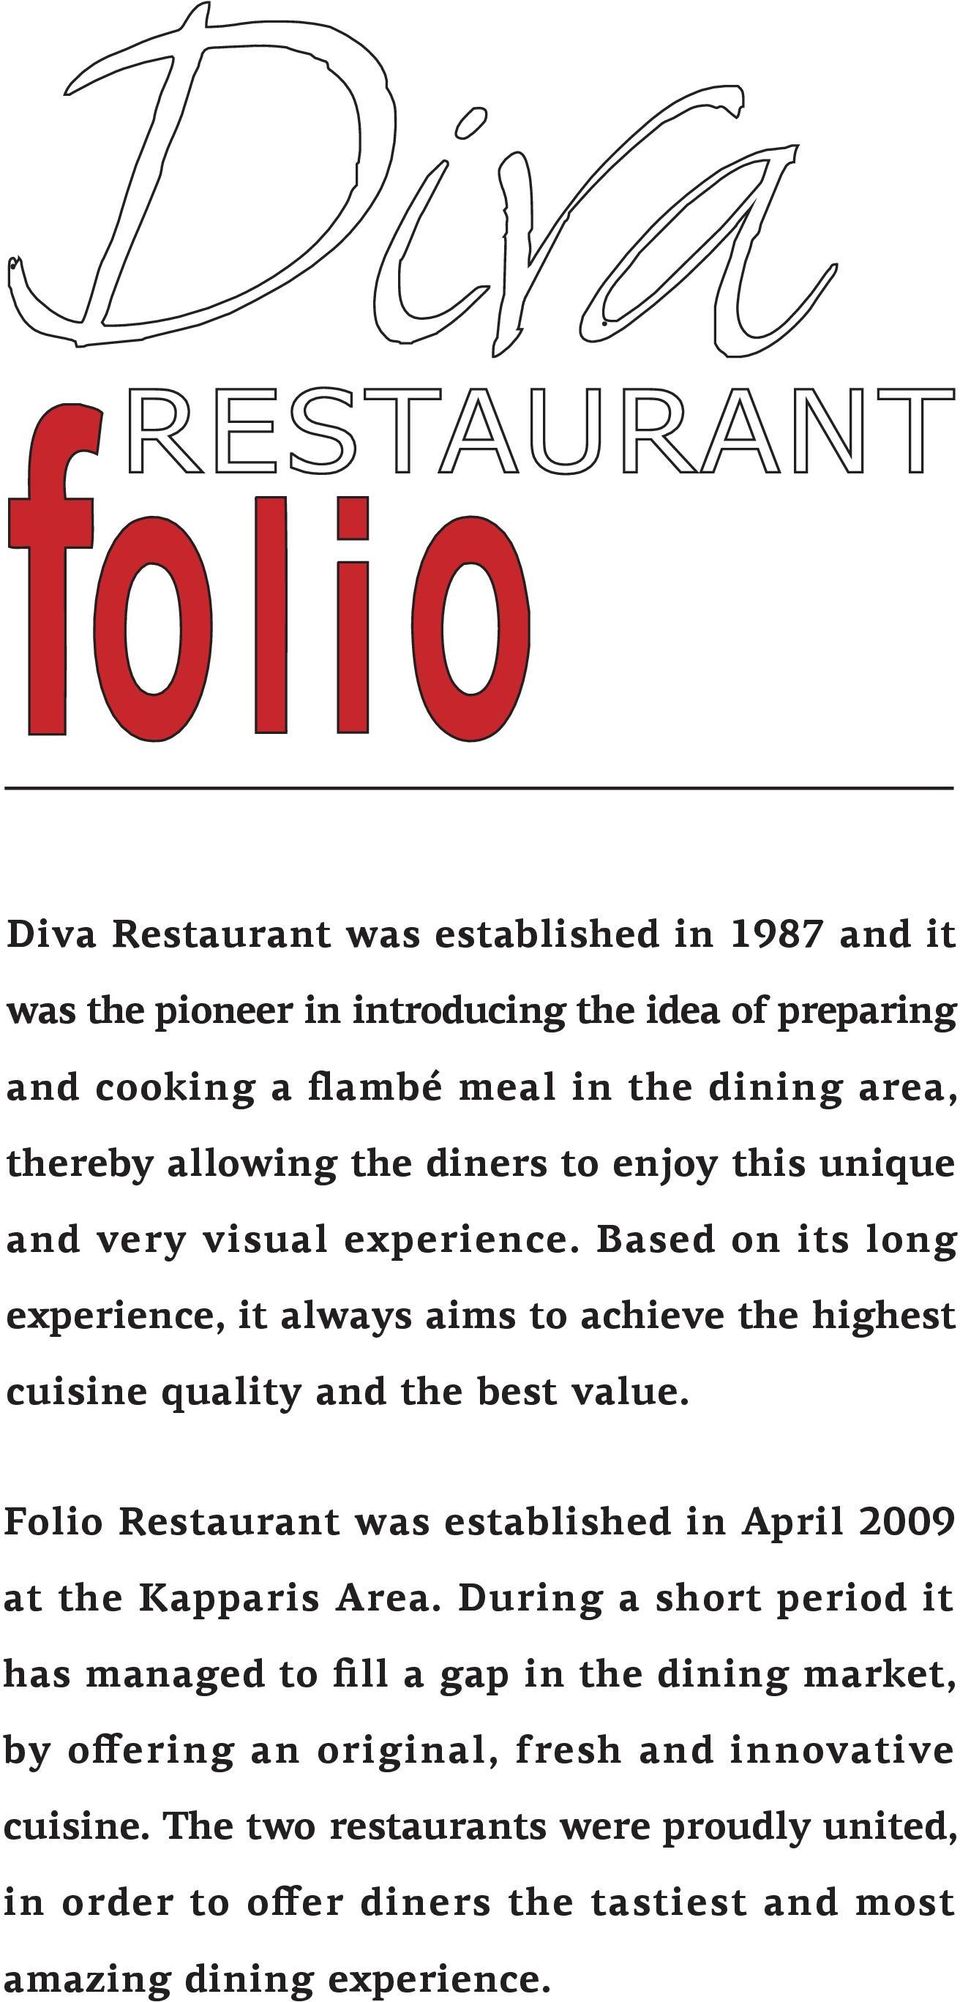 Based on its long experience, it always aims to achieve the highest cuisine quality and the best value.